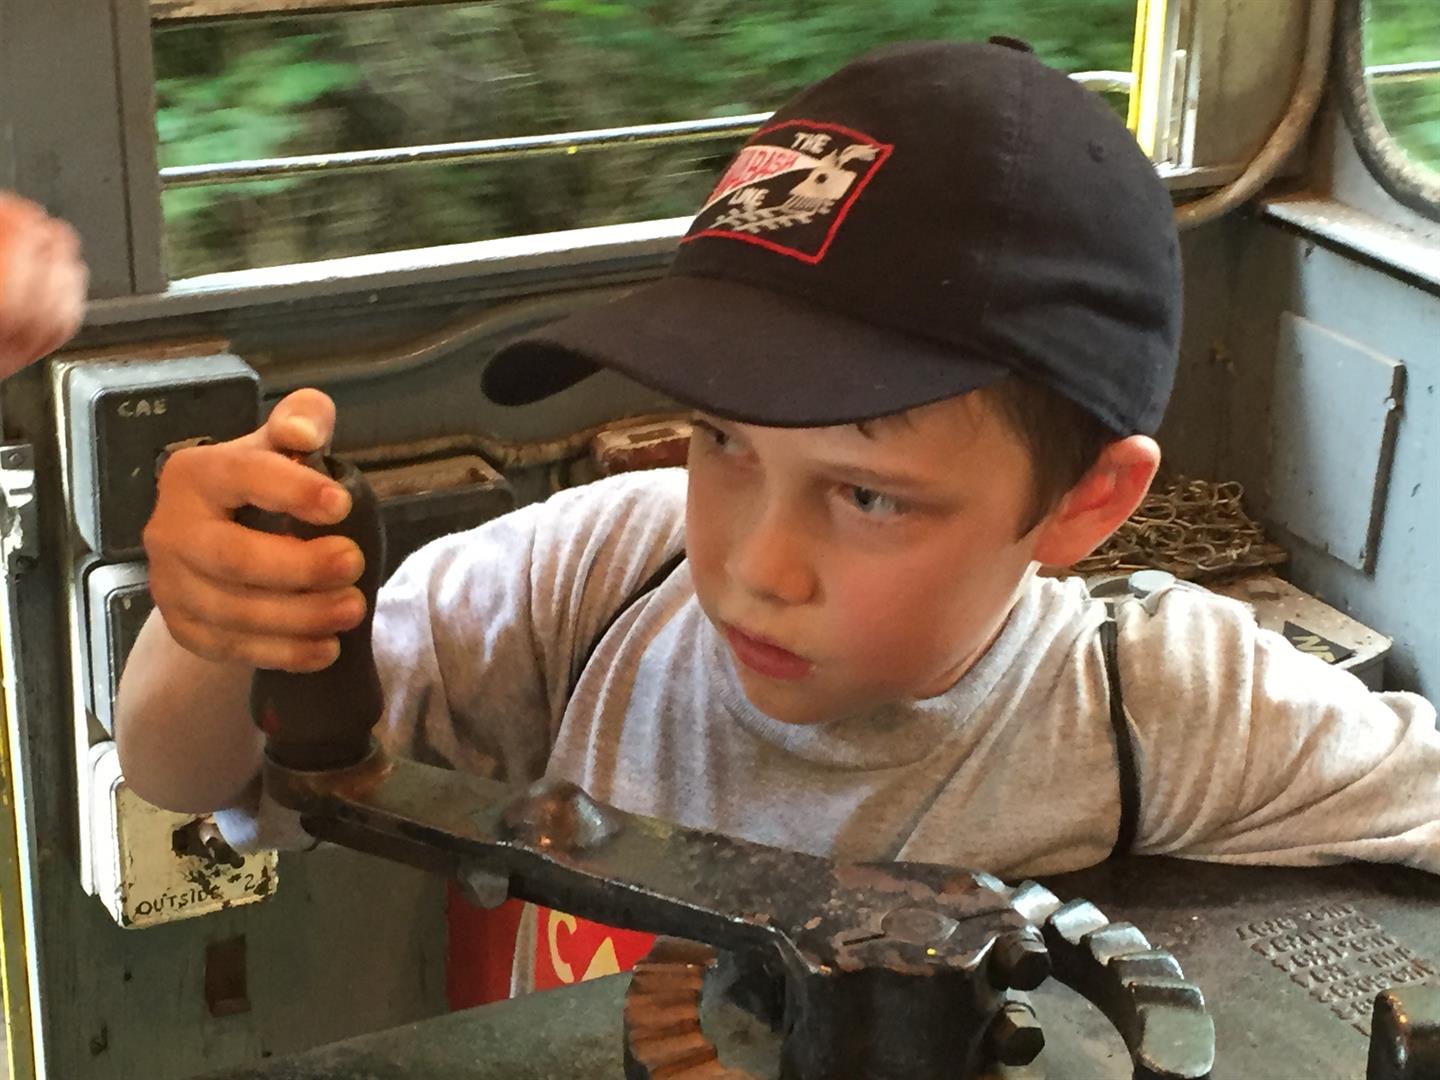 Every boy's dream is to be the engineer.   Live you dream by being a volunteer at the Fox River Trolley Museum